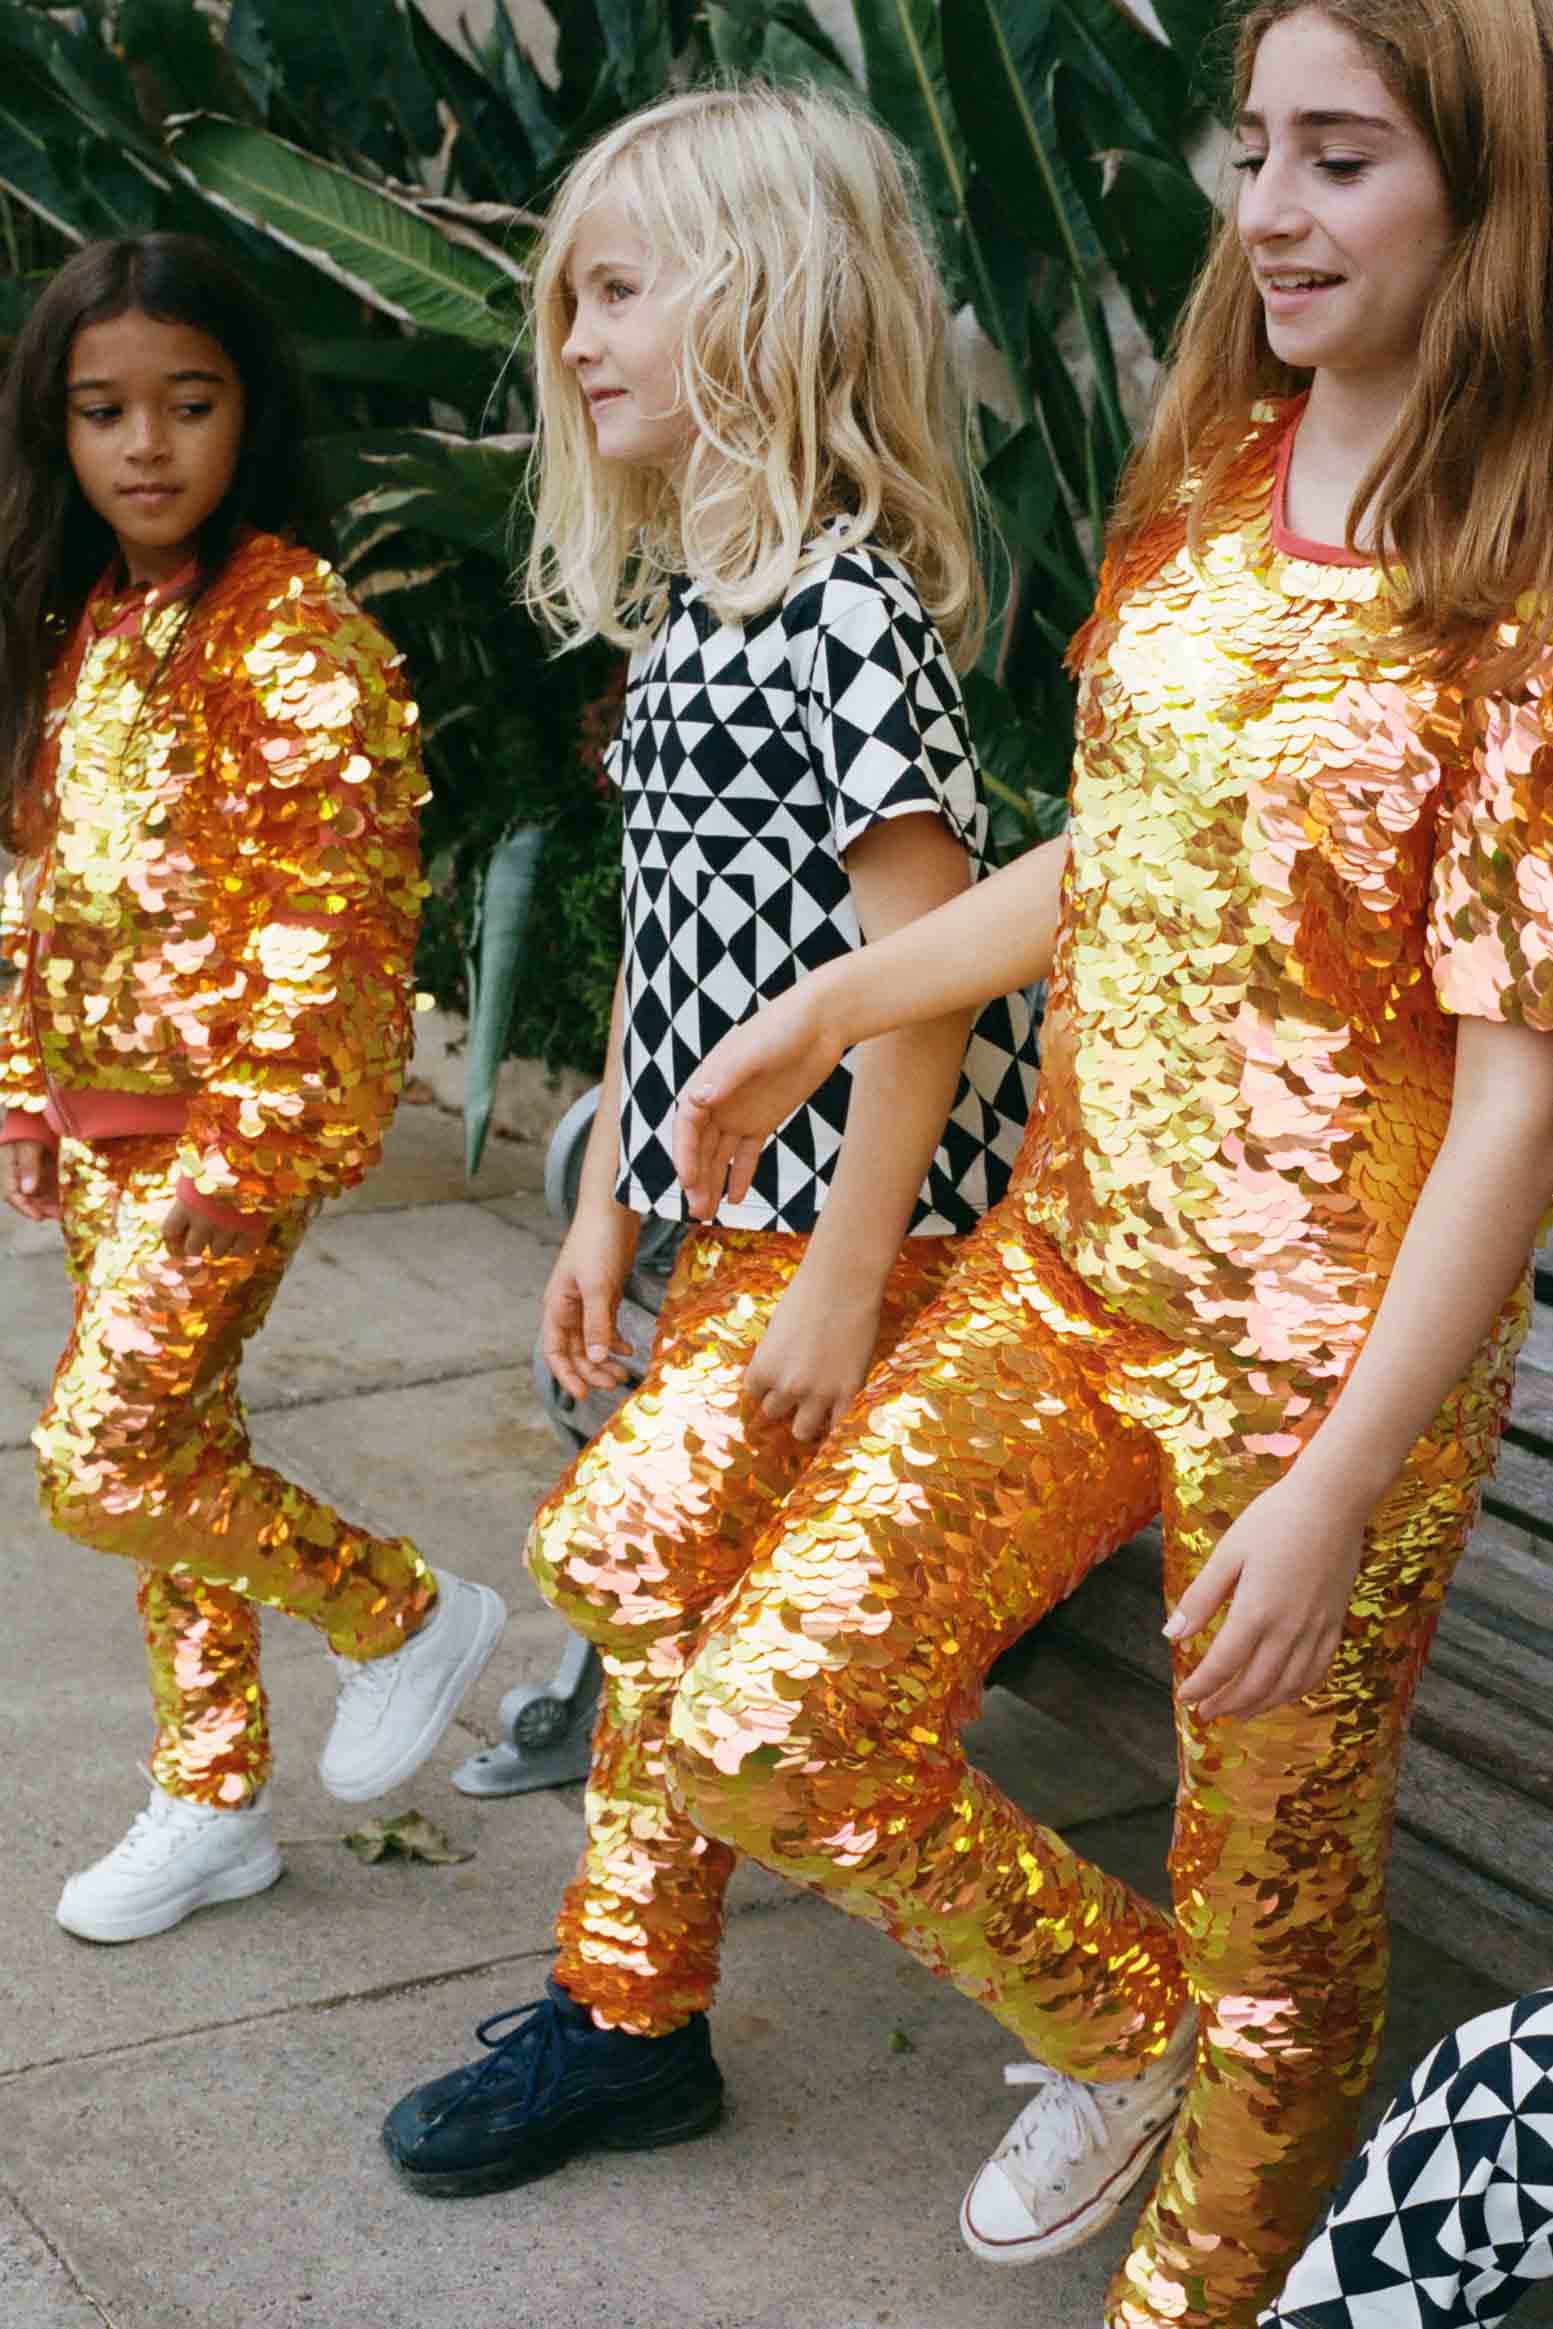 Three children in a brightly lit outdoor walled garden space with tropical plants. They are all wearing Rosa Bloom fox m orange, gold and yellow, shimmering sequin clothing. They are wearing the fox sequin leggings, sequin childrens t-shirts and matching festival sequin bomber jacket. The middle child is dressed in Childrenswear Rosa Bloom tri-print in black and white.